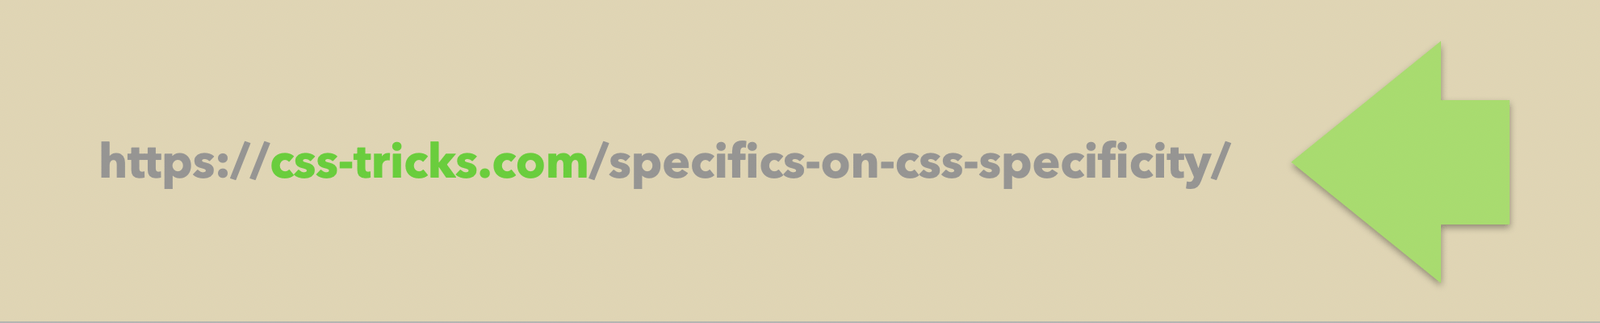 arrow pointing to https://css-tricks.com/specifics-on-css-specificity/